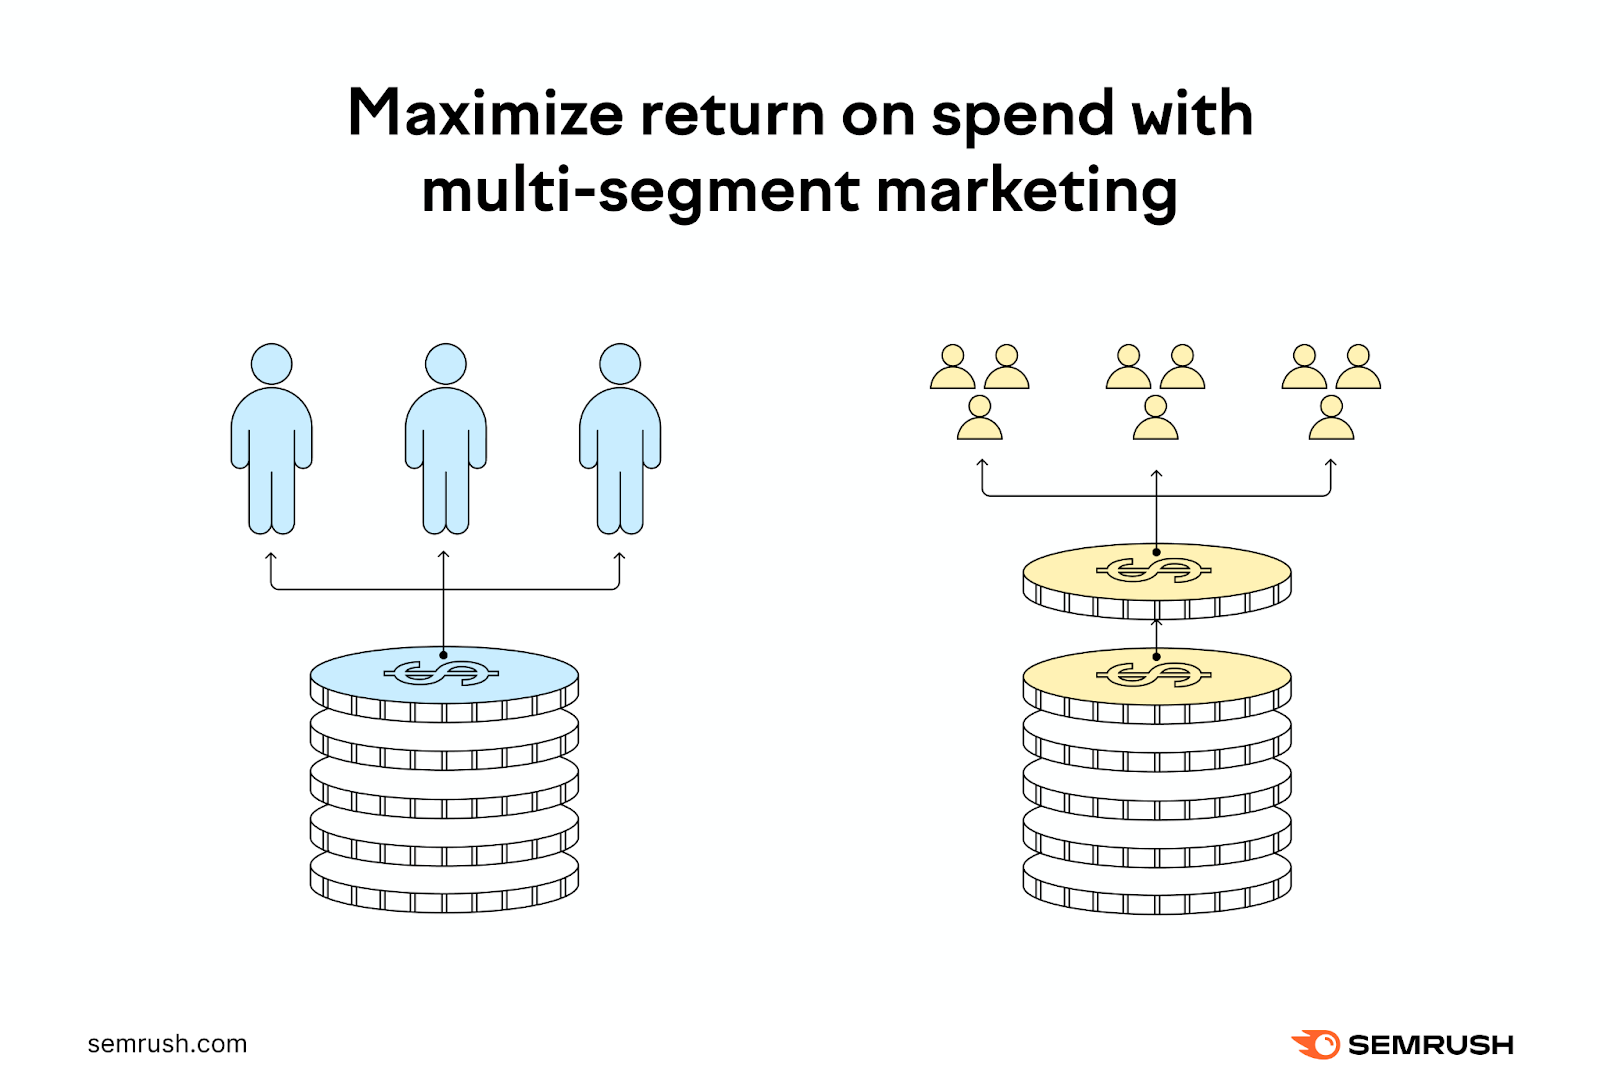 Marketing segments should get more spend as they provide more return on investment.